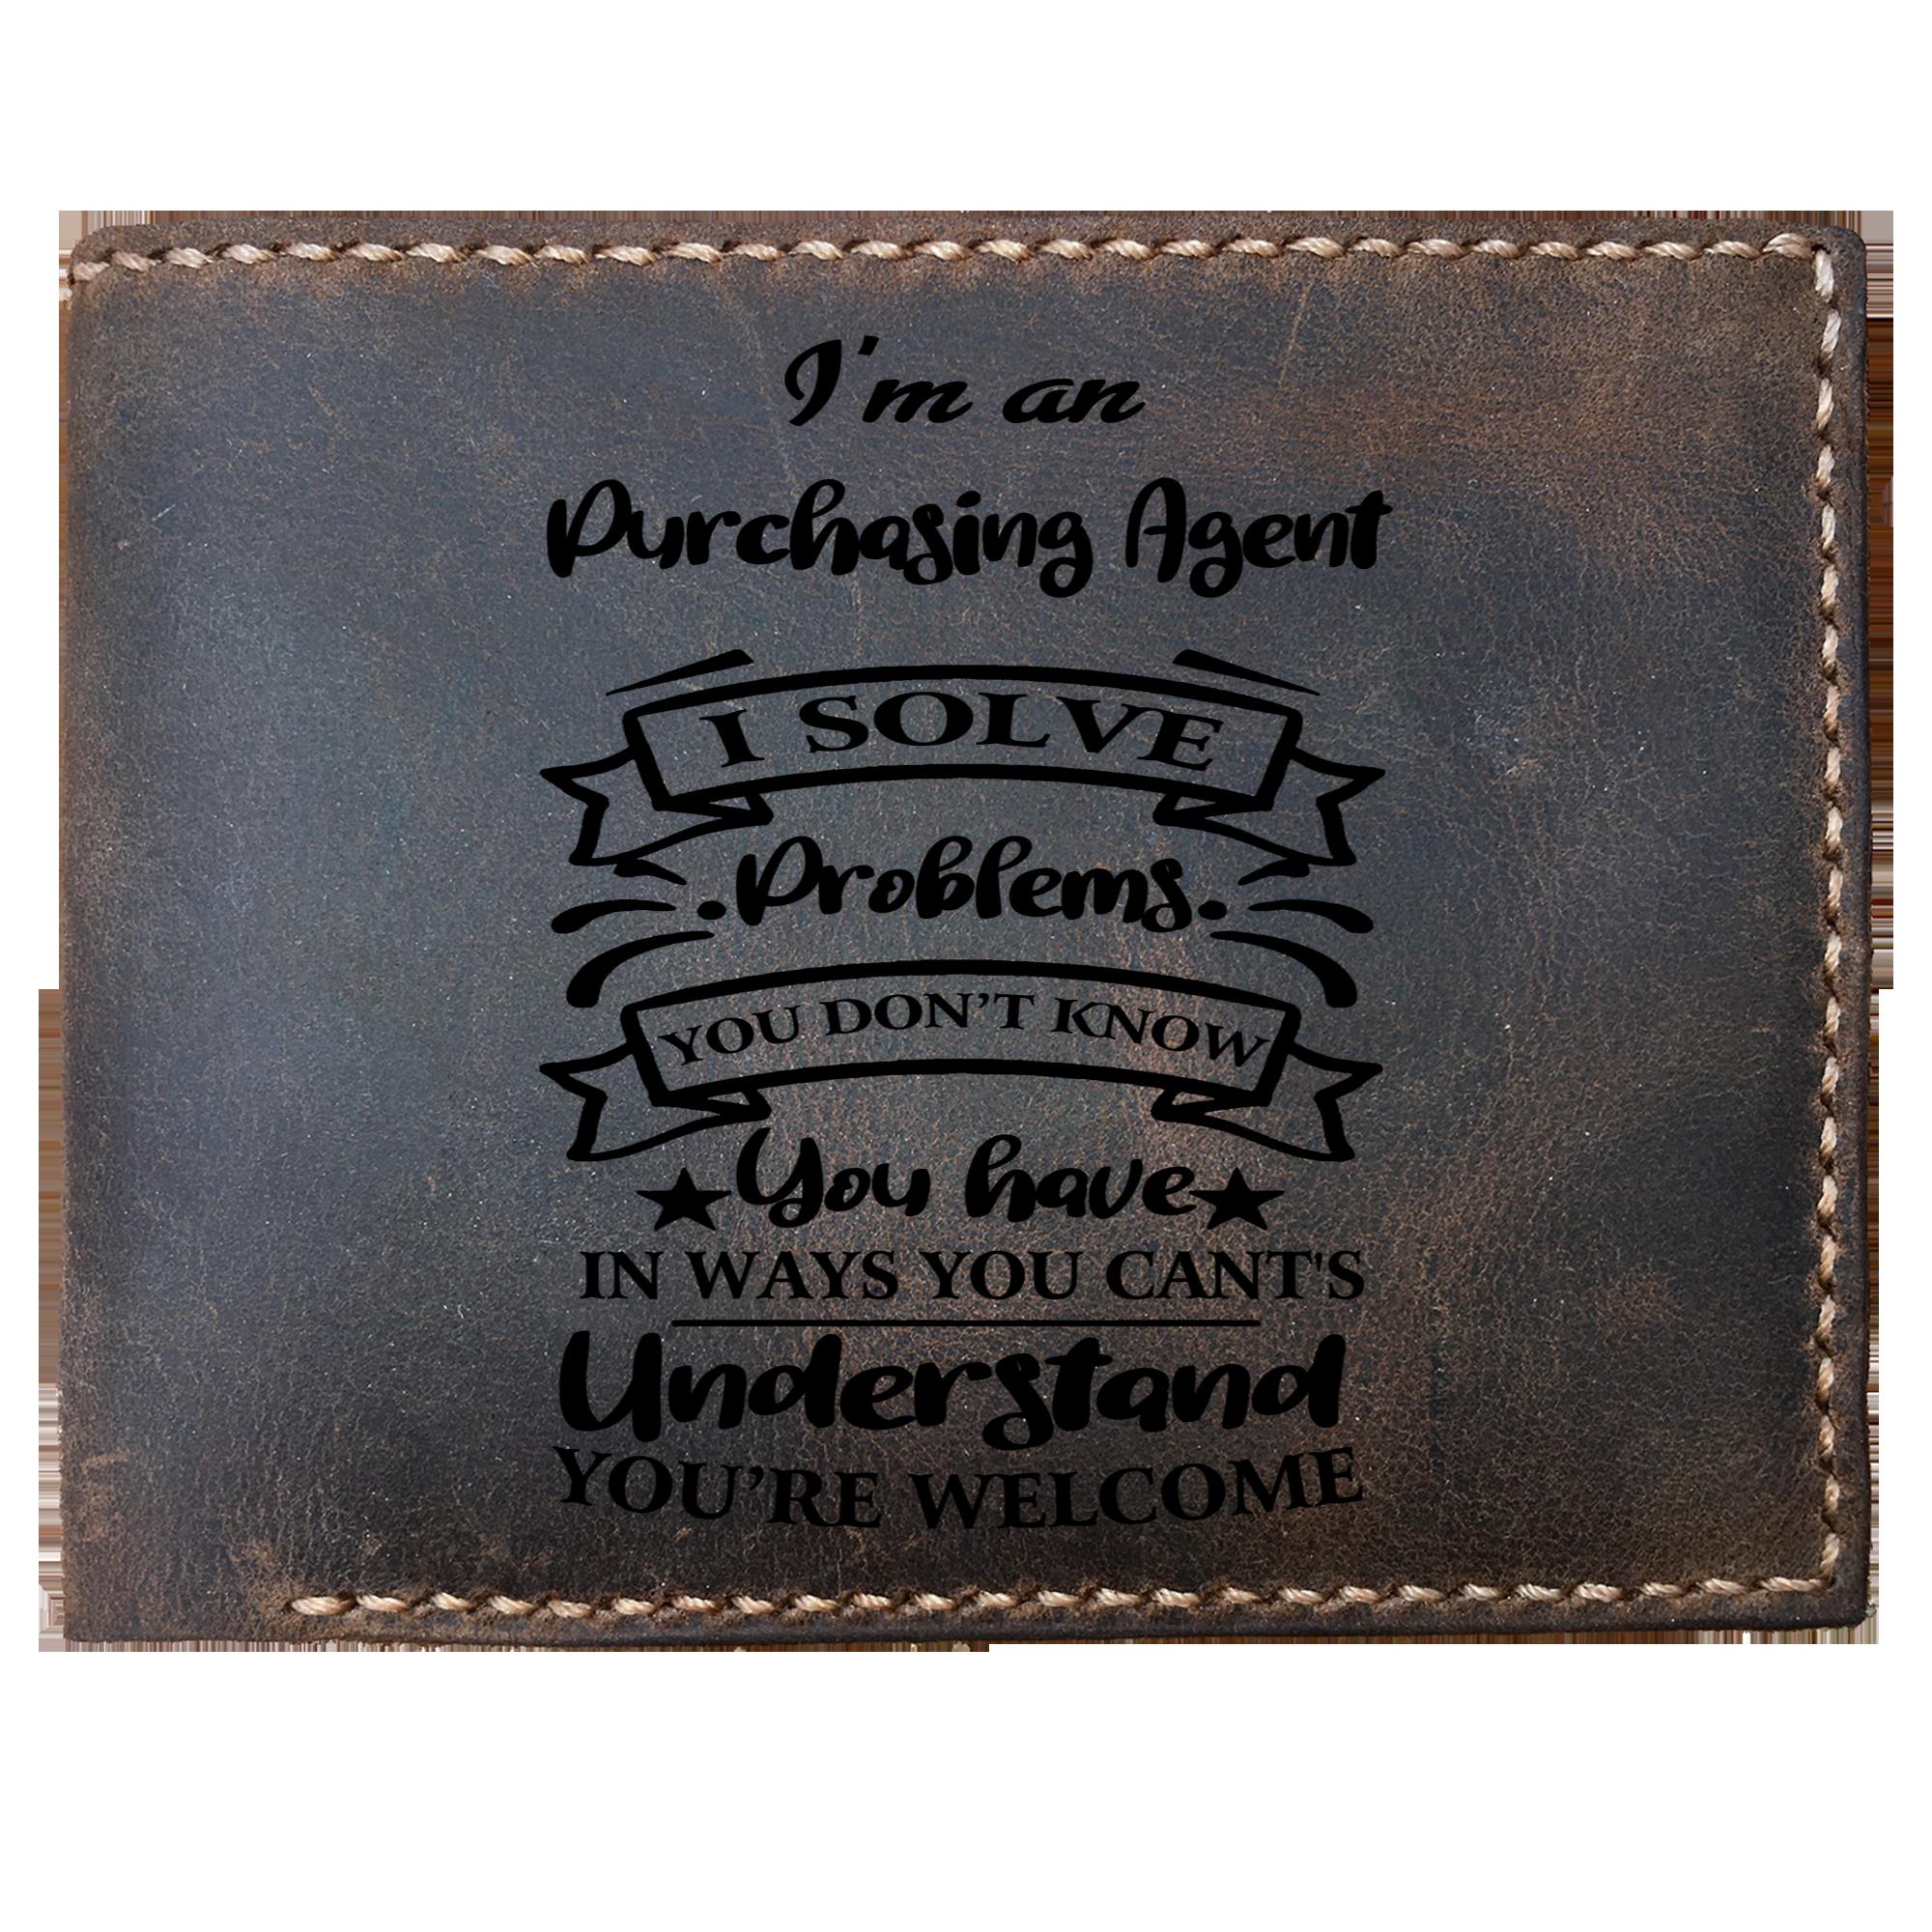 Skitongifts Funny Custom Laser Engraved Bifold Leather Wallet For Men, I'm an Purchasing Agent Solve Problems, Father's Day Gifts